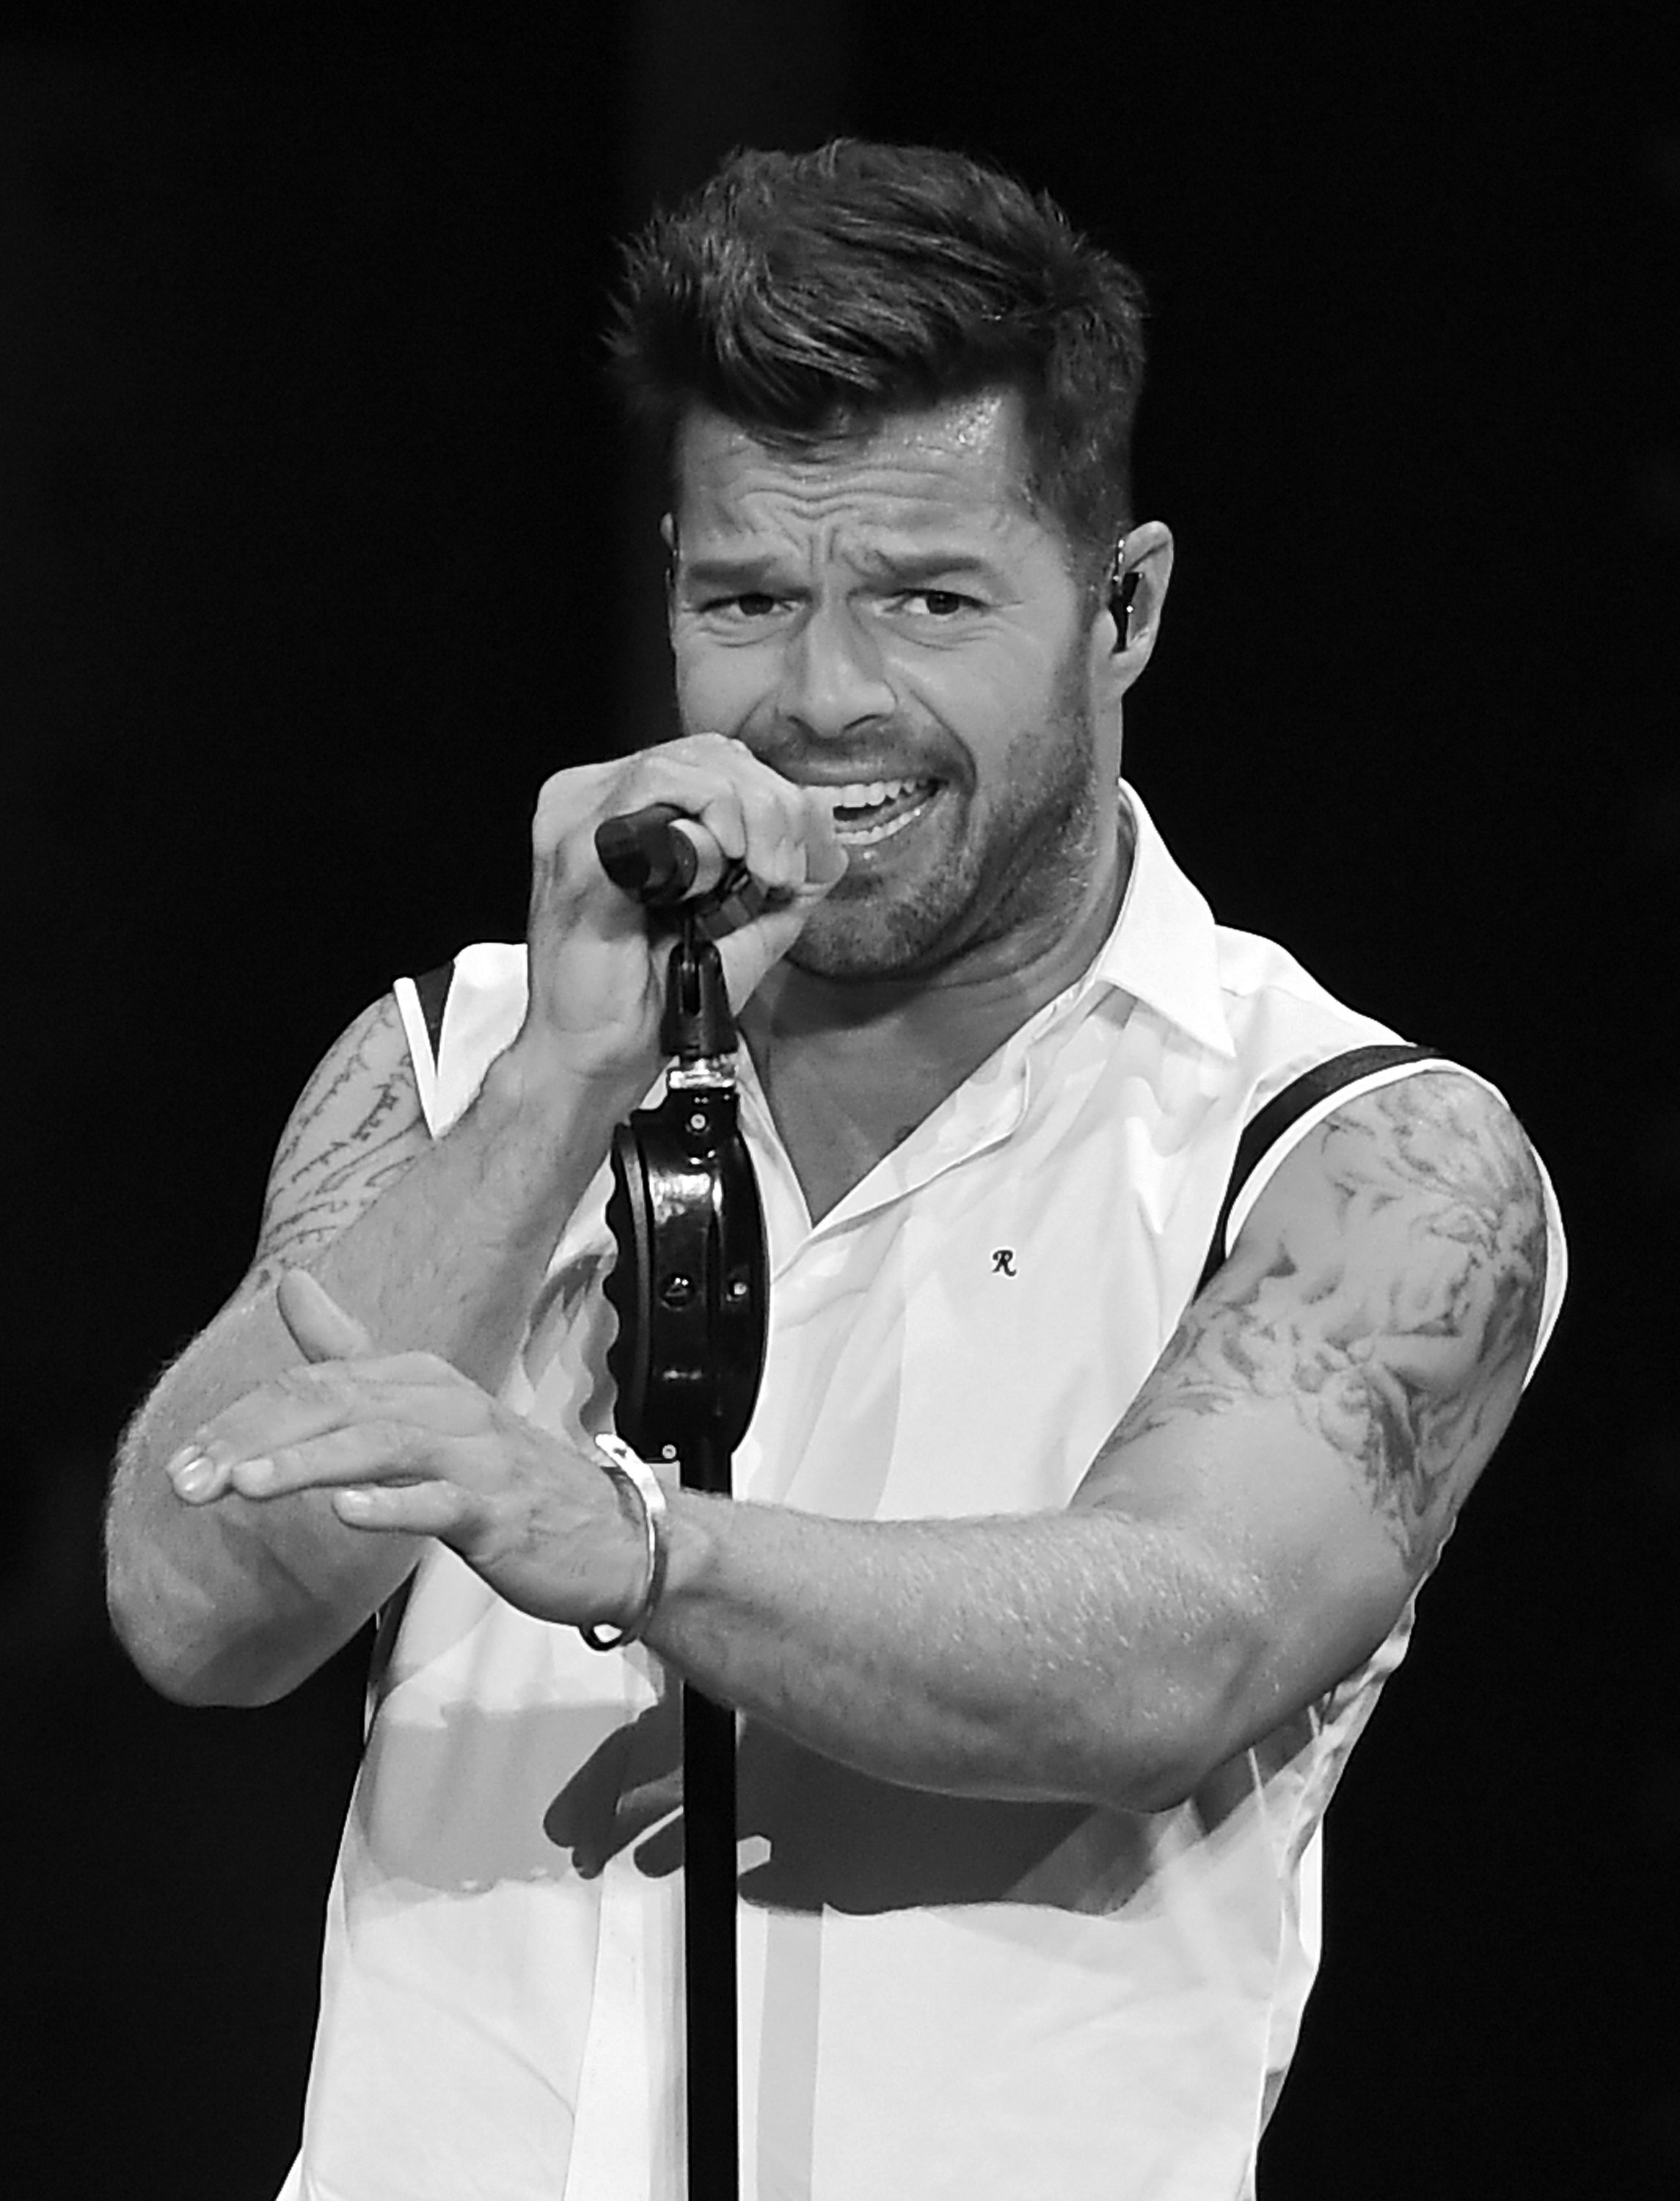 LAS VEGAS, NV - SEPTEMBER 15:  (EDITORS NOTE: Image was processed using digital filters) Recording artist Ricky Martin performs as he kicks off his One World Tour in support of the album "A Quien Quiera Escuchar" at Axis at Planet Hollywood Resort & Casino on September 15, 2015 in Las Vegas, Nevada.  (Photo by Ethan Miller/Getty Images)